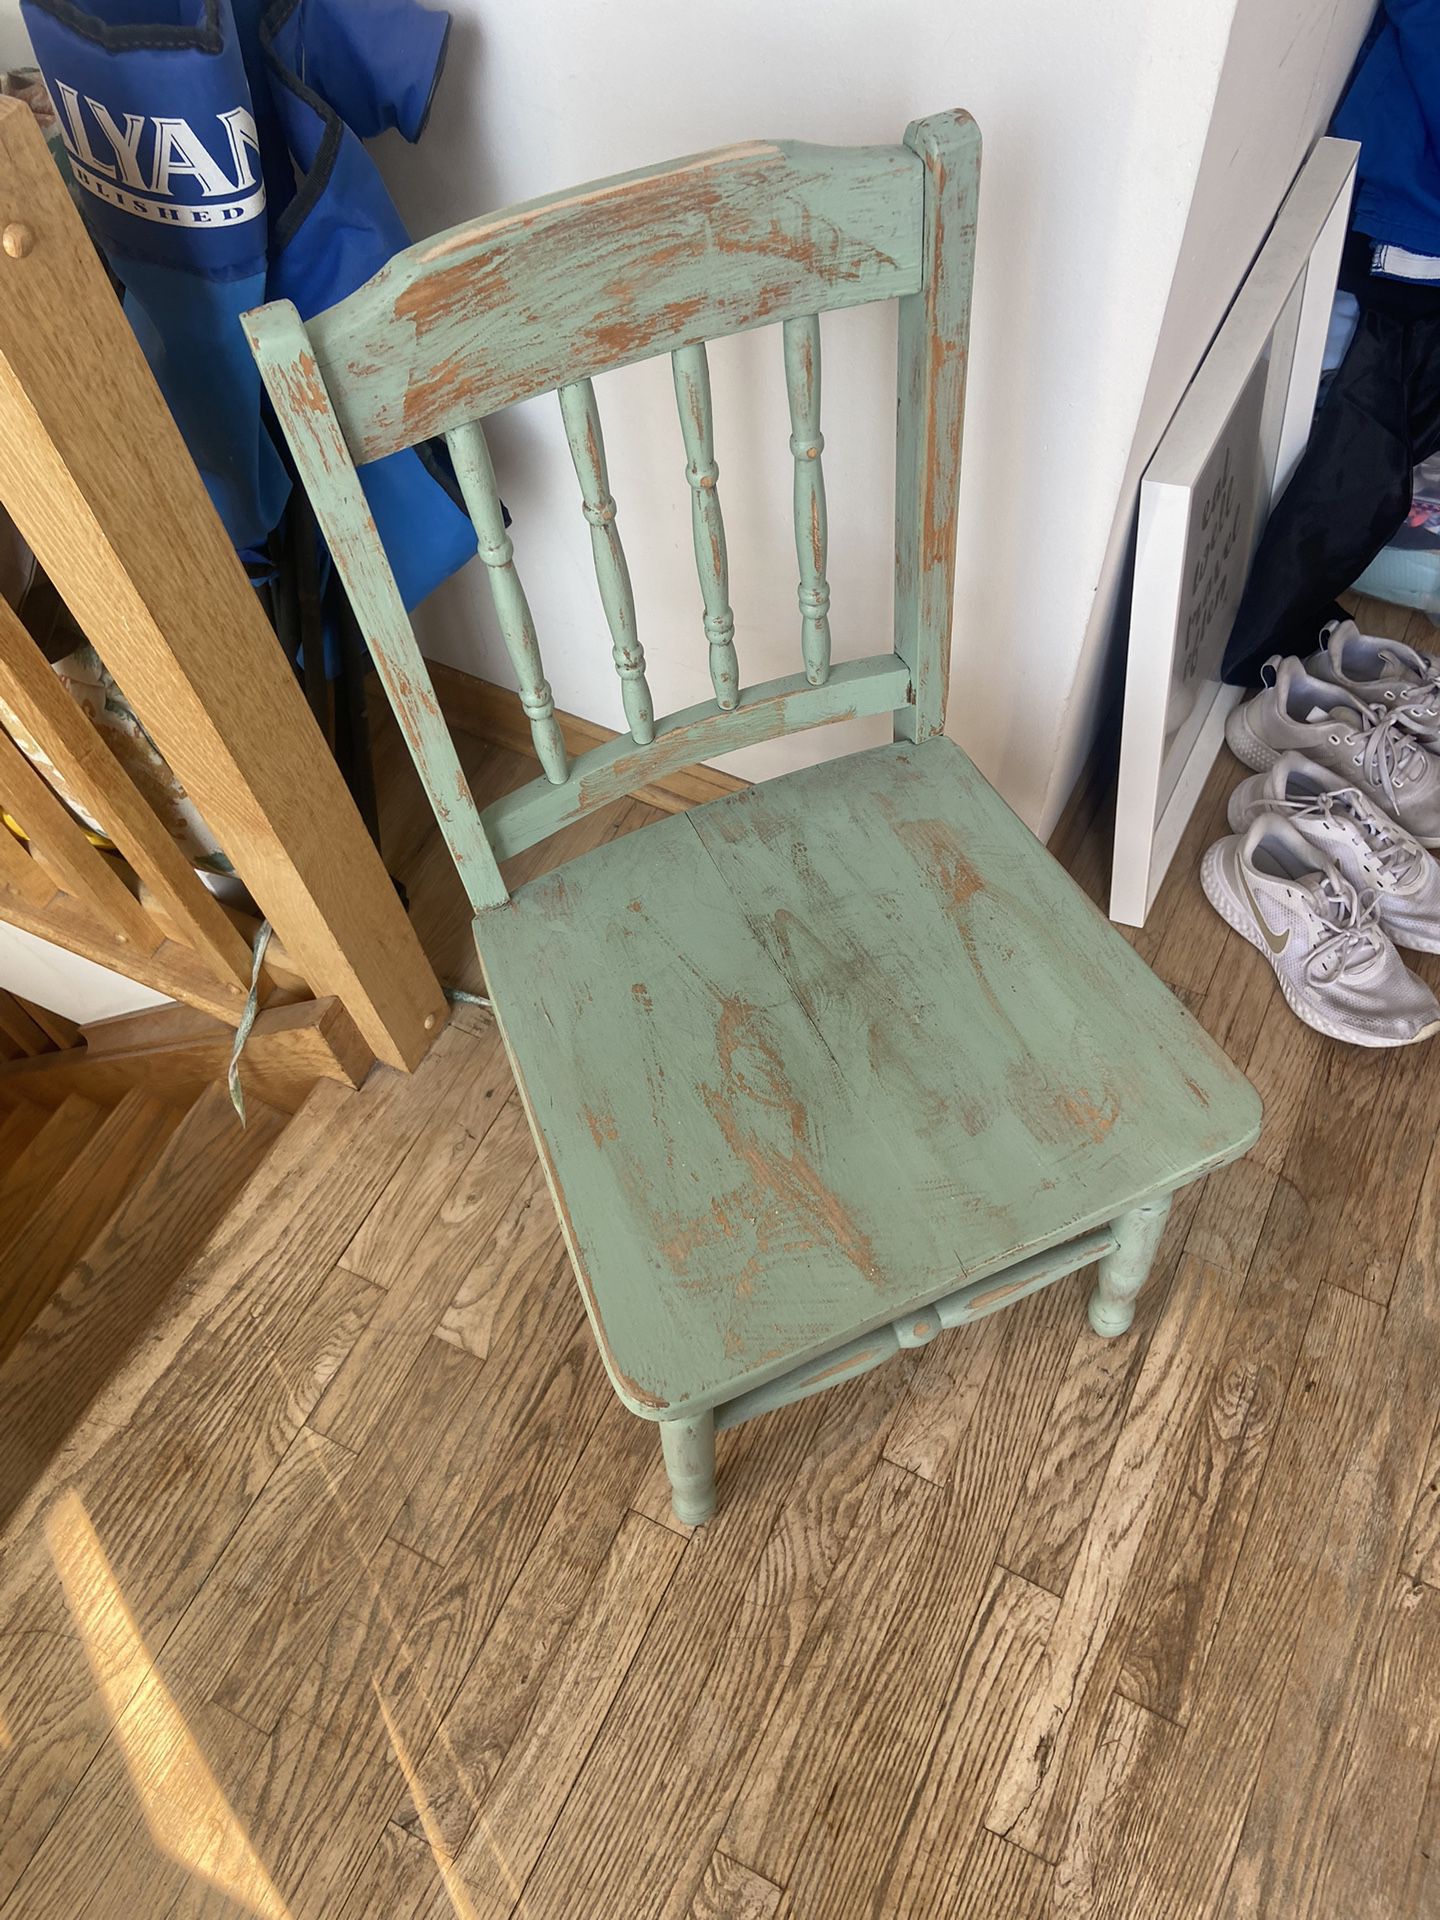 Small Wooden Chair - Blue/green Distressed Paint 